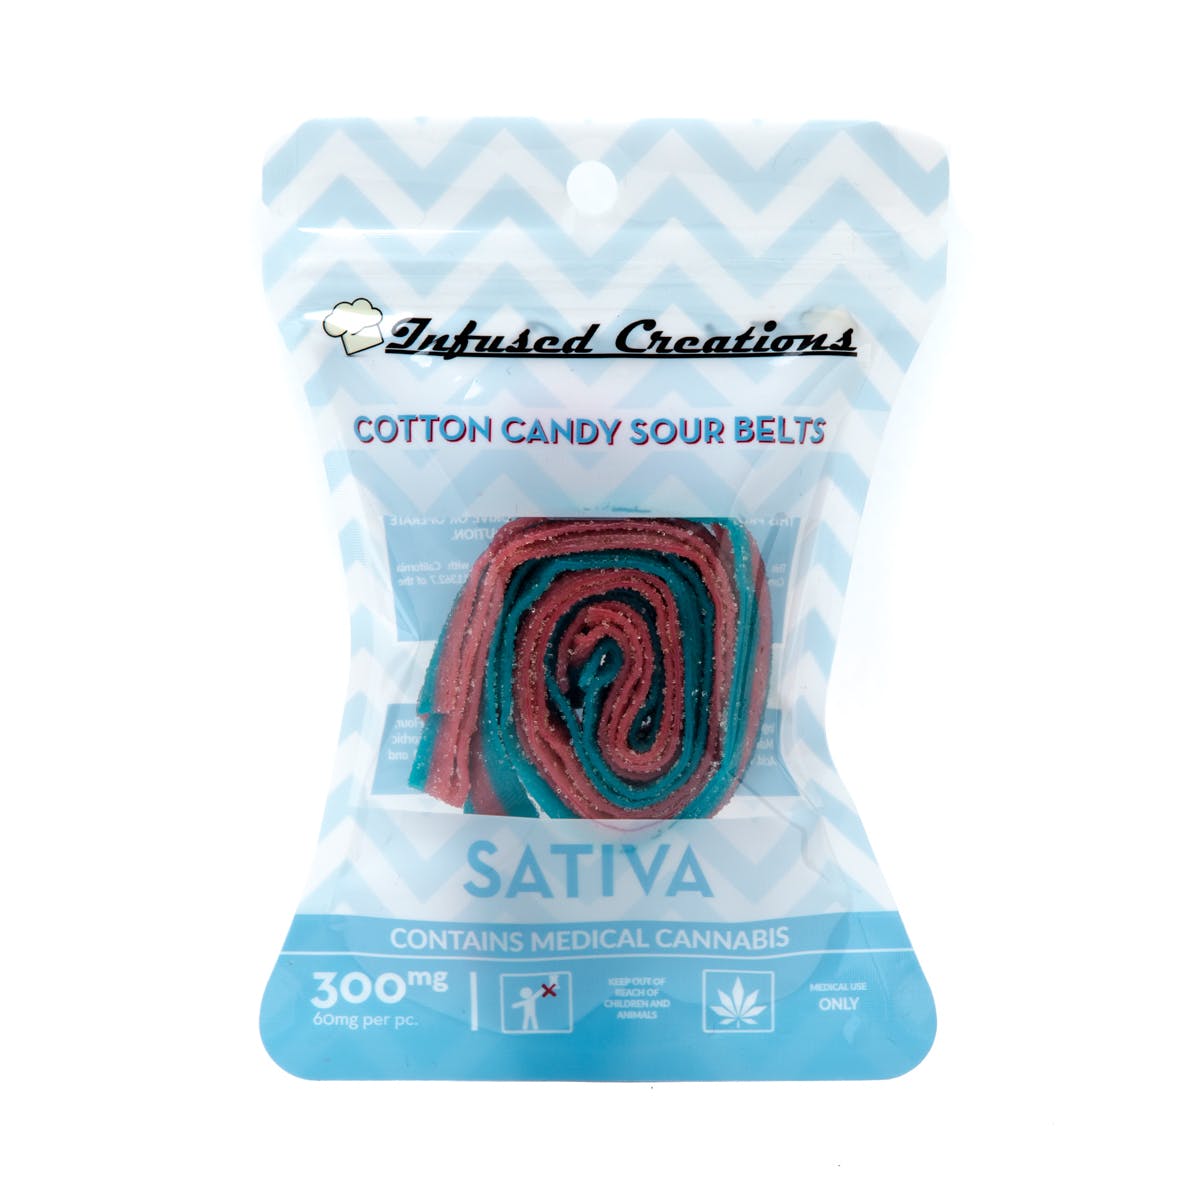 Cotton Candy Sour Belts Sativa, 300mg